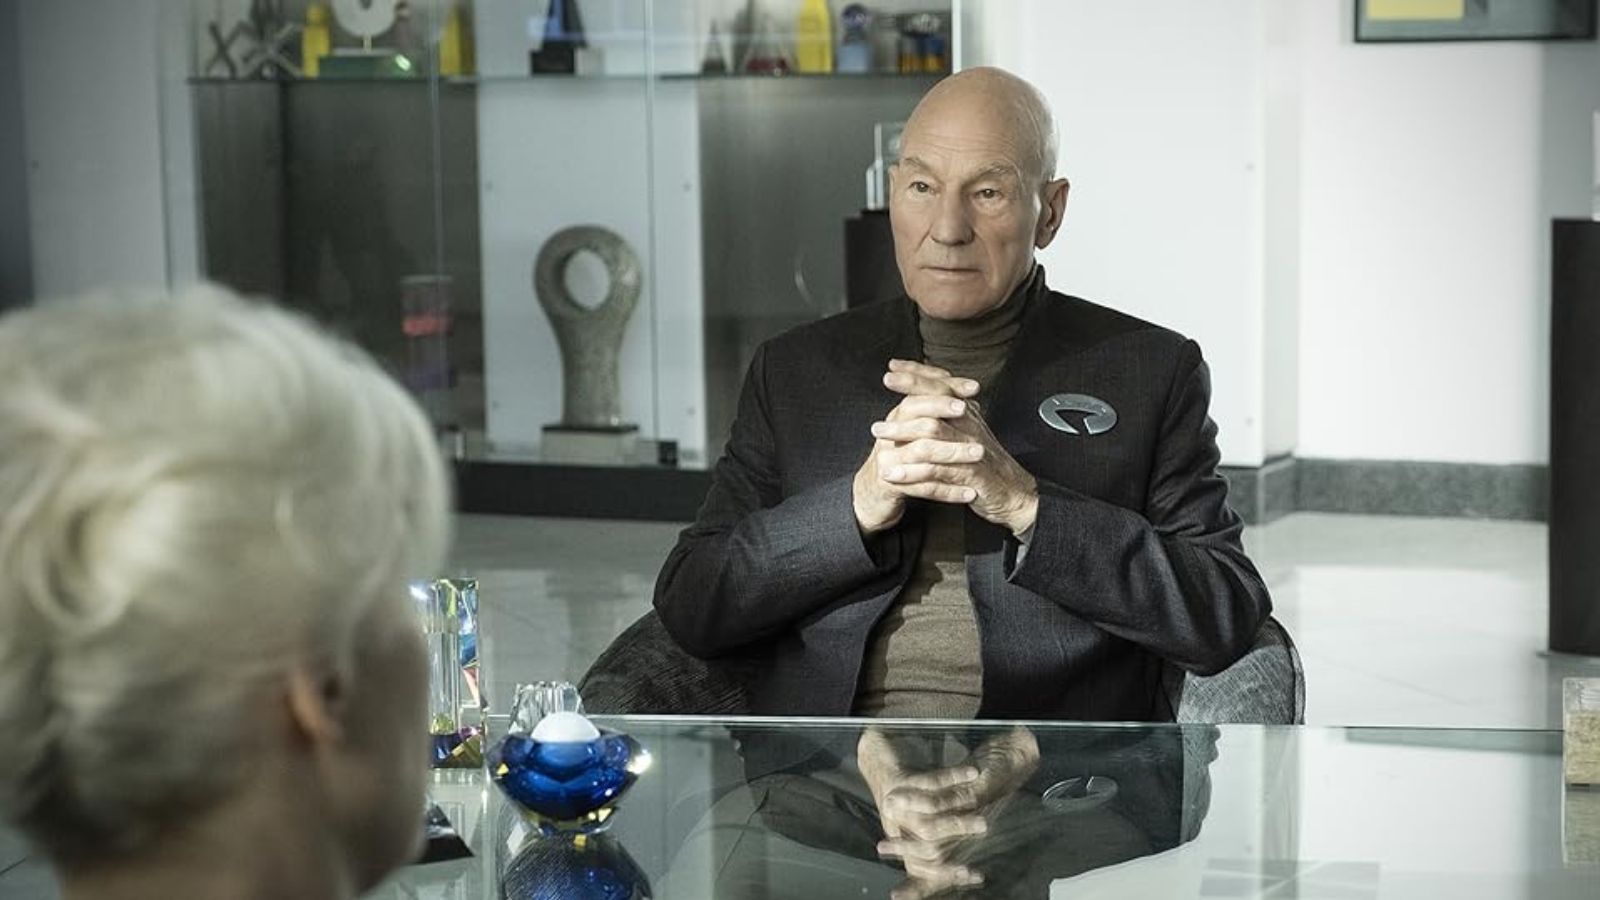 <span>Everything that </span><span>was loved</span><span> about Picard in The Next Generation got lost in the spin-off series. Unlike Captain Kirk, Picard brought us sophistication and a commanding demeanor thanks to Patrick </span><span>Stewart’s</span><span> well-trained British voice. Making him more of an action figure </span><span>didn’t</span><span> go down well, and </span><a class="editor-rtfLink" href="https://gamerant.com/star-trek-picard-patrick-stewart-series-hate-explained/#:~:text=Fans%20felt%20that%20Picard%20failed,Star%20Trek%3A%20The%20Next%20Generation." rel="noopener"><span>fans </span><span>weren’t</span><span> impressed. </span></a>